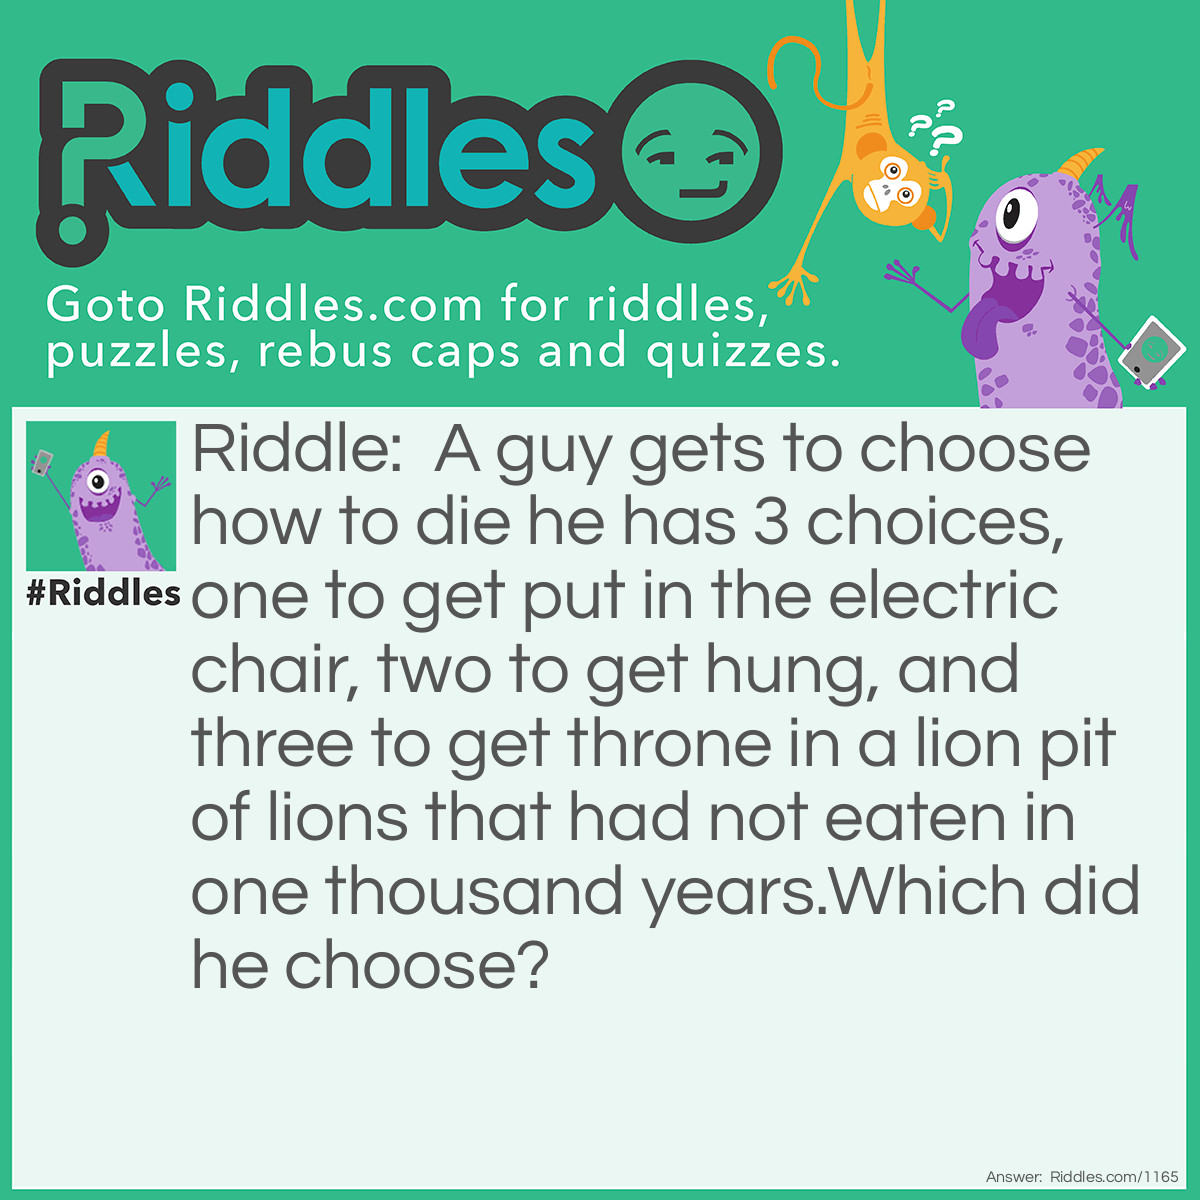 Riddle: A guy gets to choose how to die he has 3 choices, one to get put in the electric chair, two to get hung, and three to get throne in a lion pit of lions that had not eaten in one thousand years.
Which did he choose? Answer: The lion pit because they had not eaten in one thousand years so they were already dead.